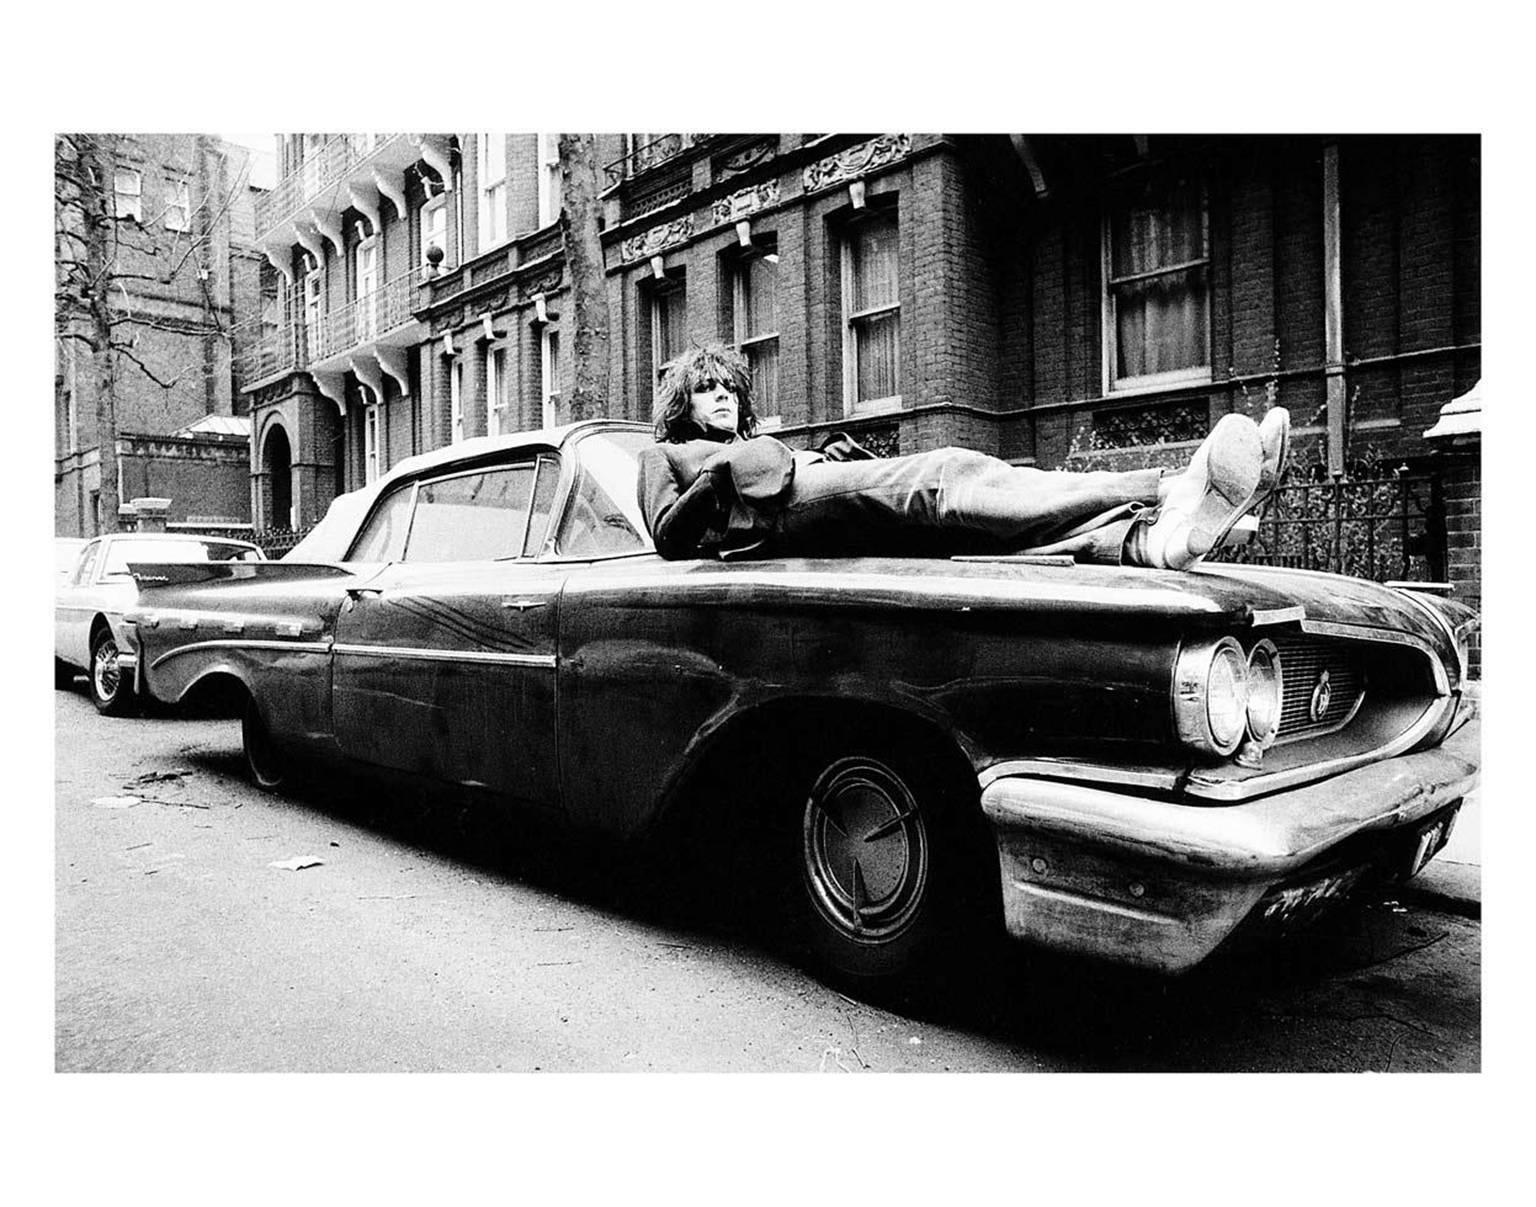 Mick Rock Black and White Photograph - Syd Barrett, Lying On Car, Earls Court Square, London 1969